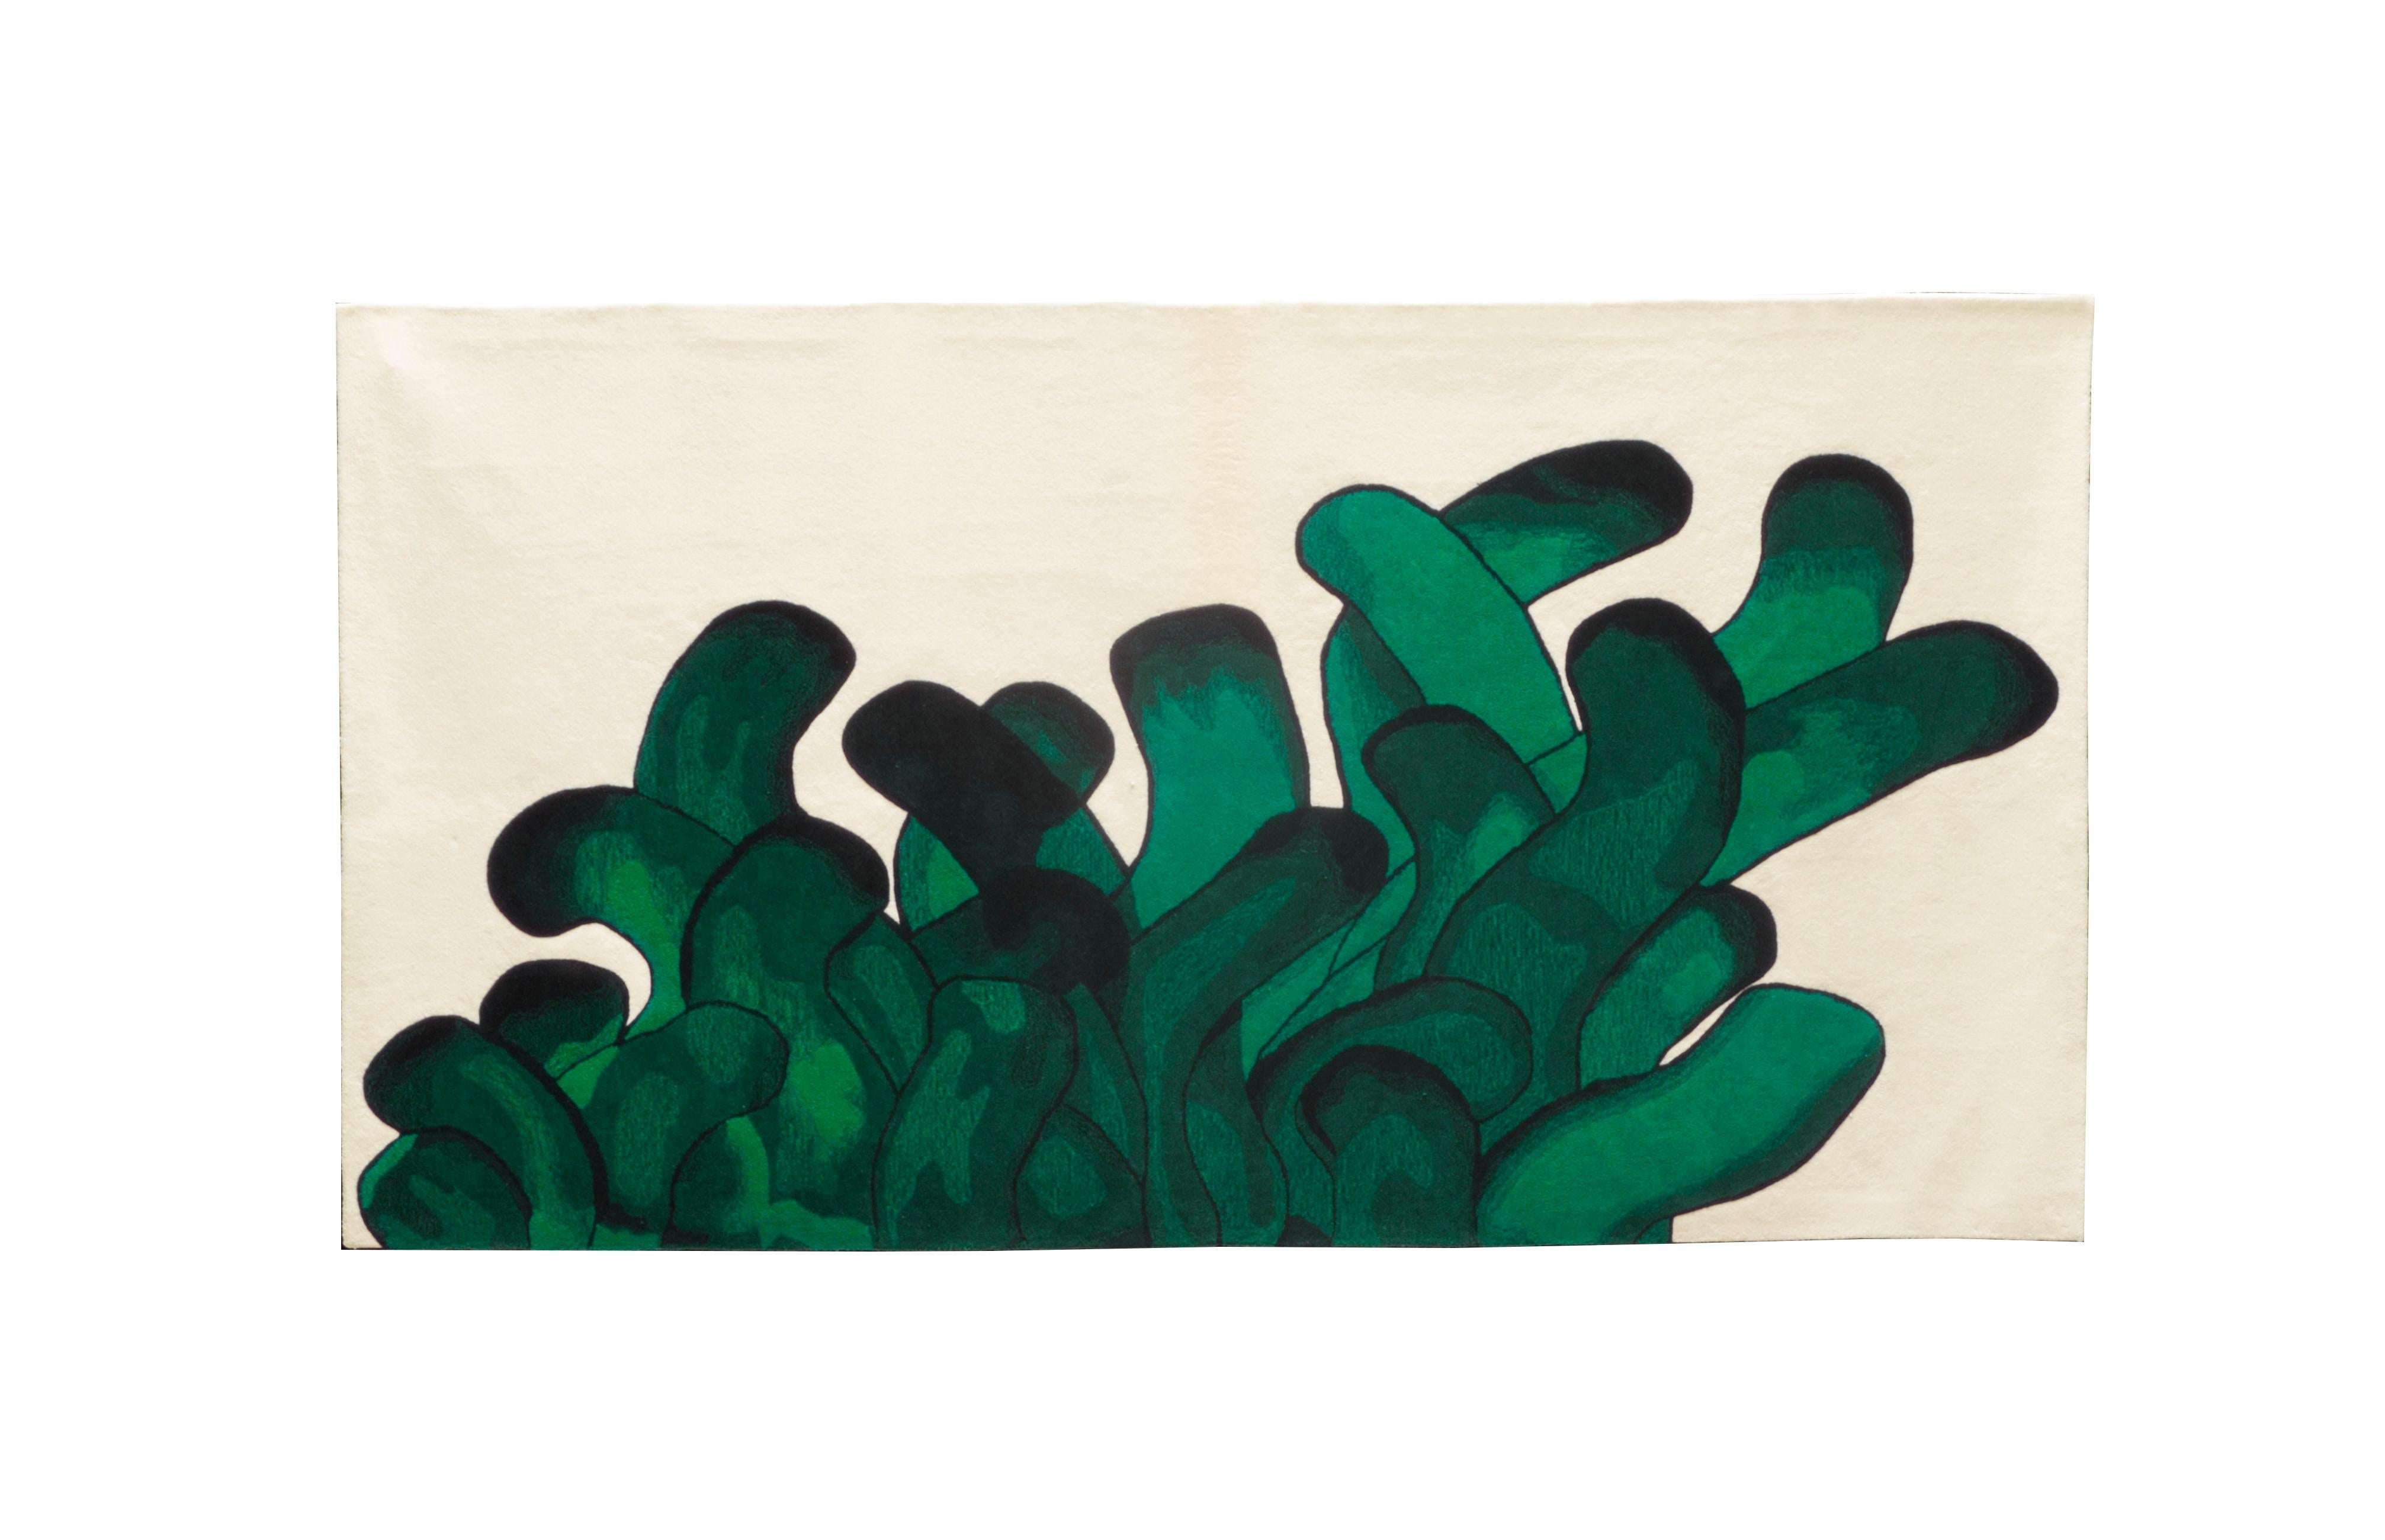 Green Anémone rug François Dumas
Anemone is a rug inspired by a painting in which brushstrokes imitate the movements of sea anemones. The rug is handmade by artisans in Portugal who tuft and cut the wool to obtain a raised design, reproducing the